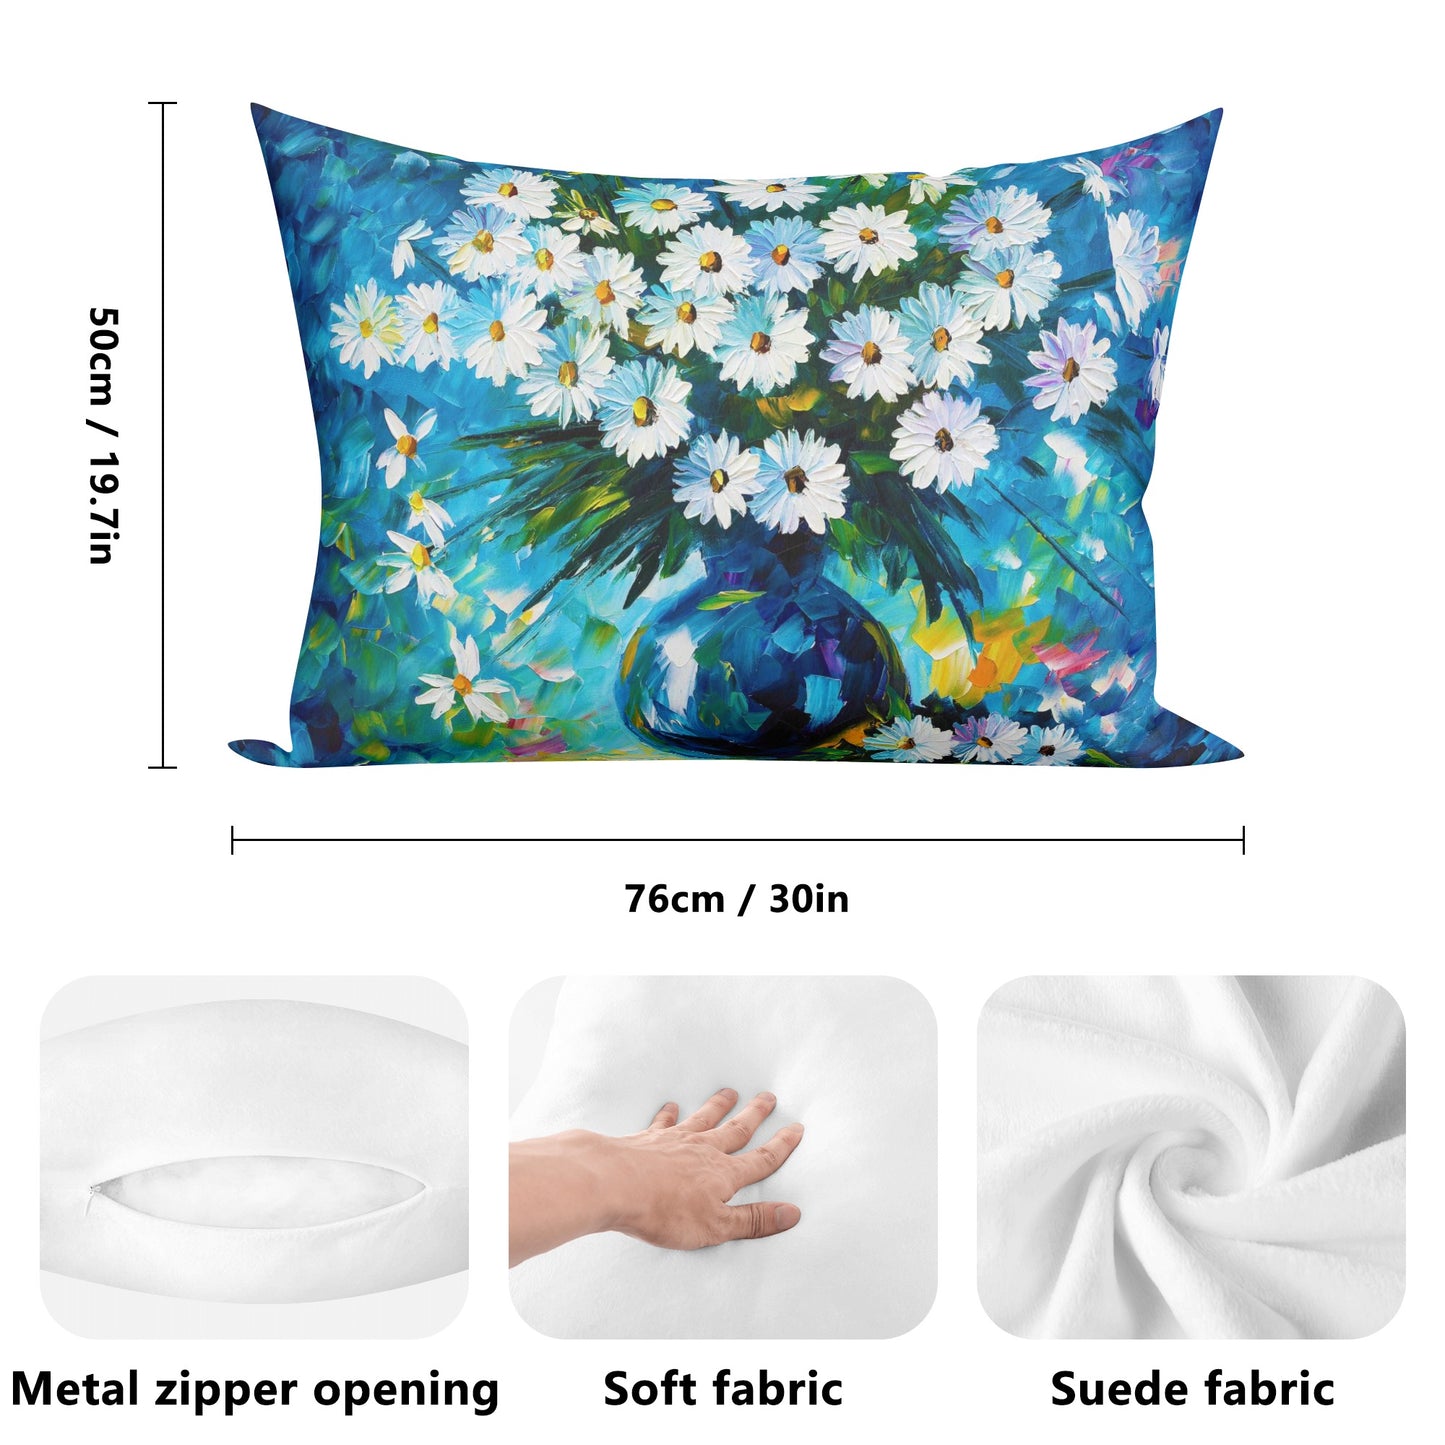 Double Side Printing Rectangular Pillow Cover Afremov RADIANCE